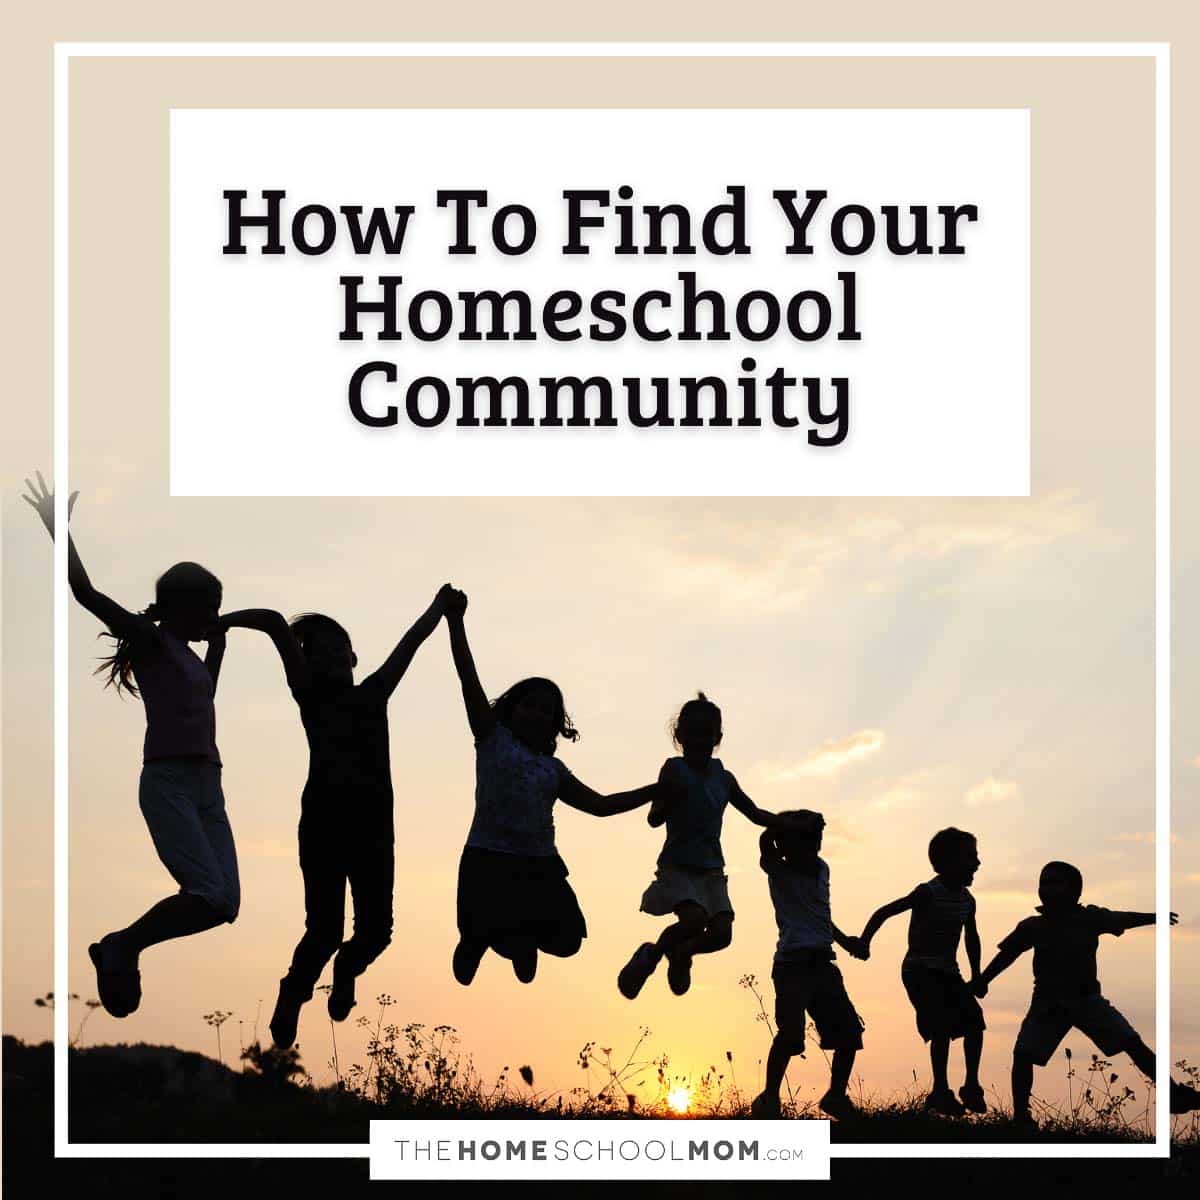 How to find your homeschool community.